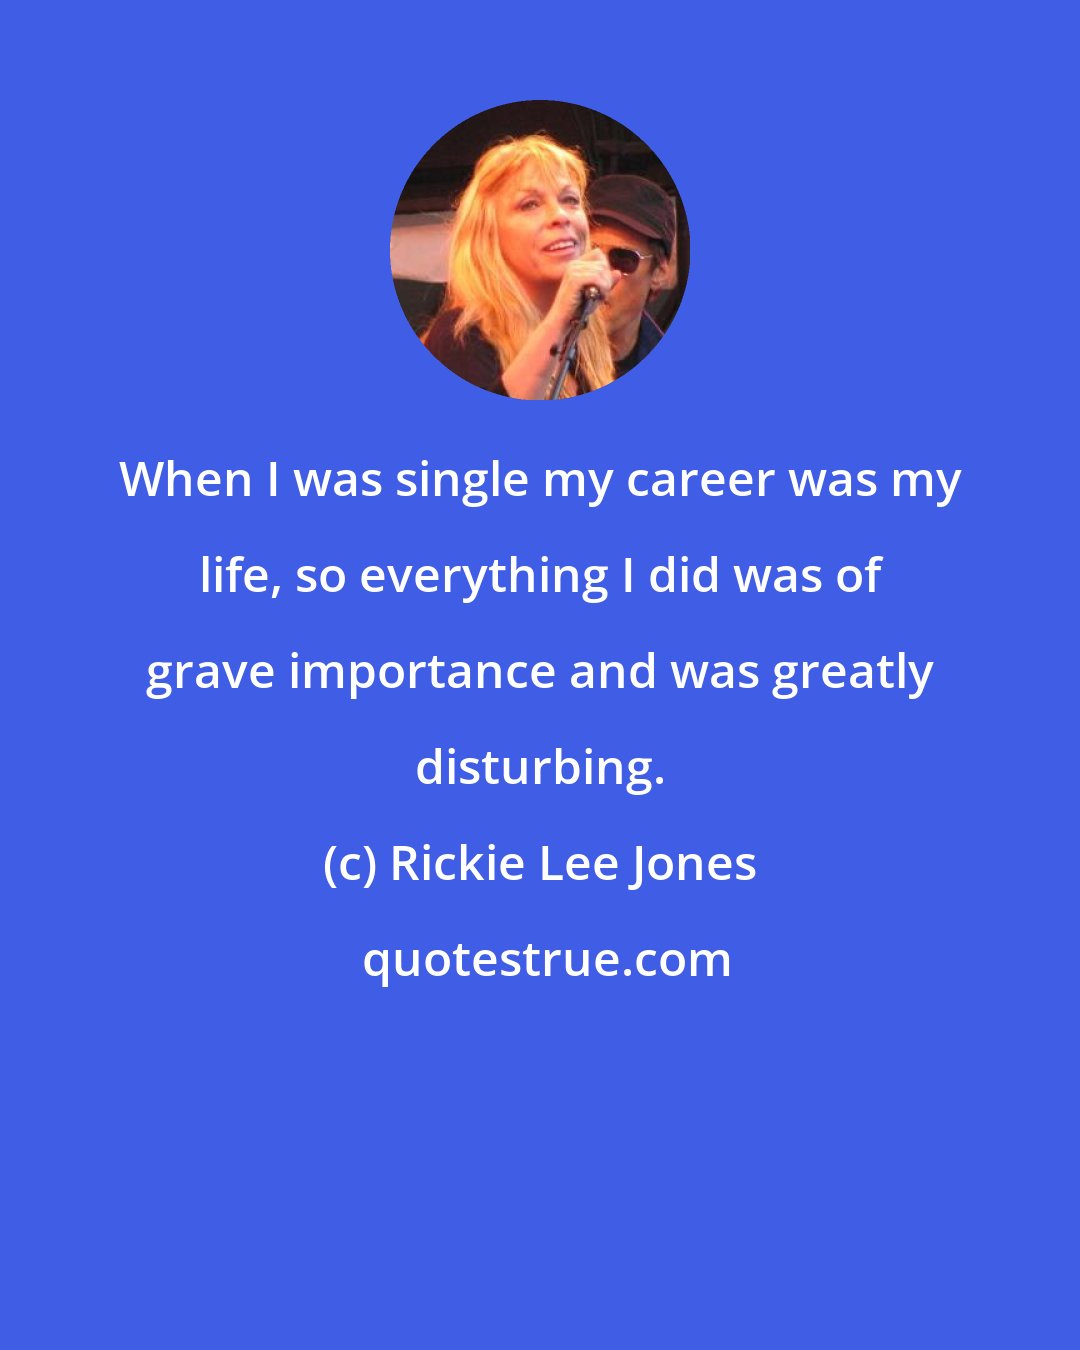 Rickie Lee Jones: When I was single my career was my life, so everything I did was of grave importance and was greatly disturbing.